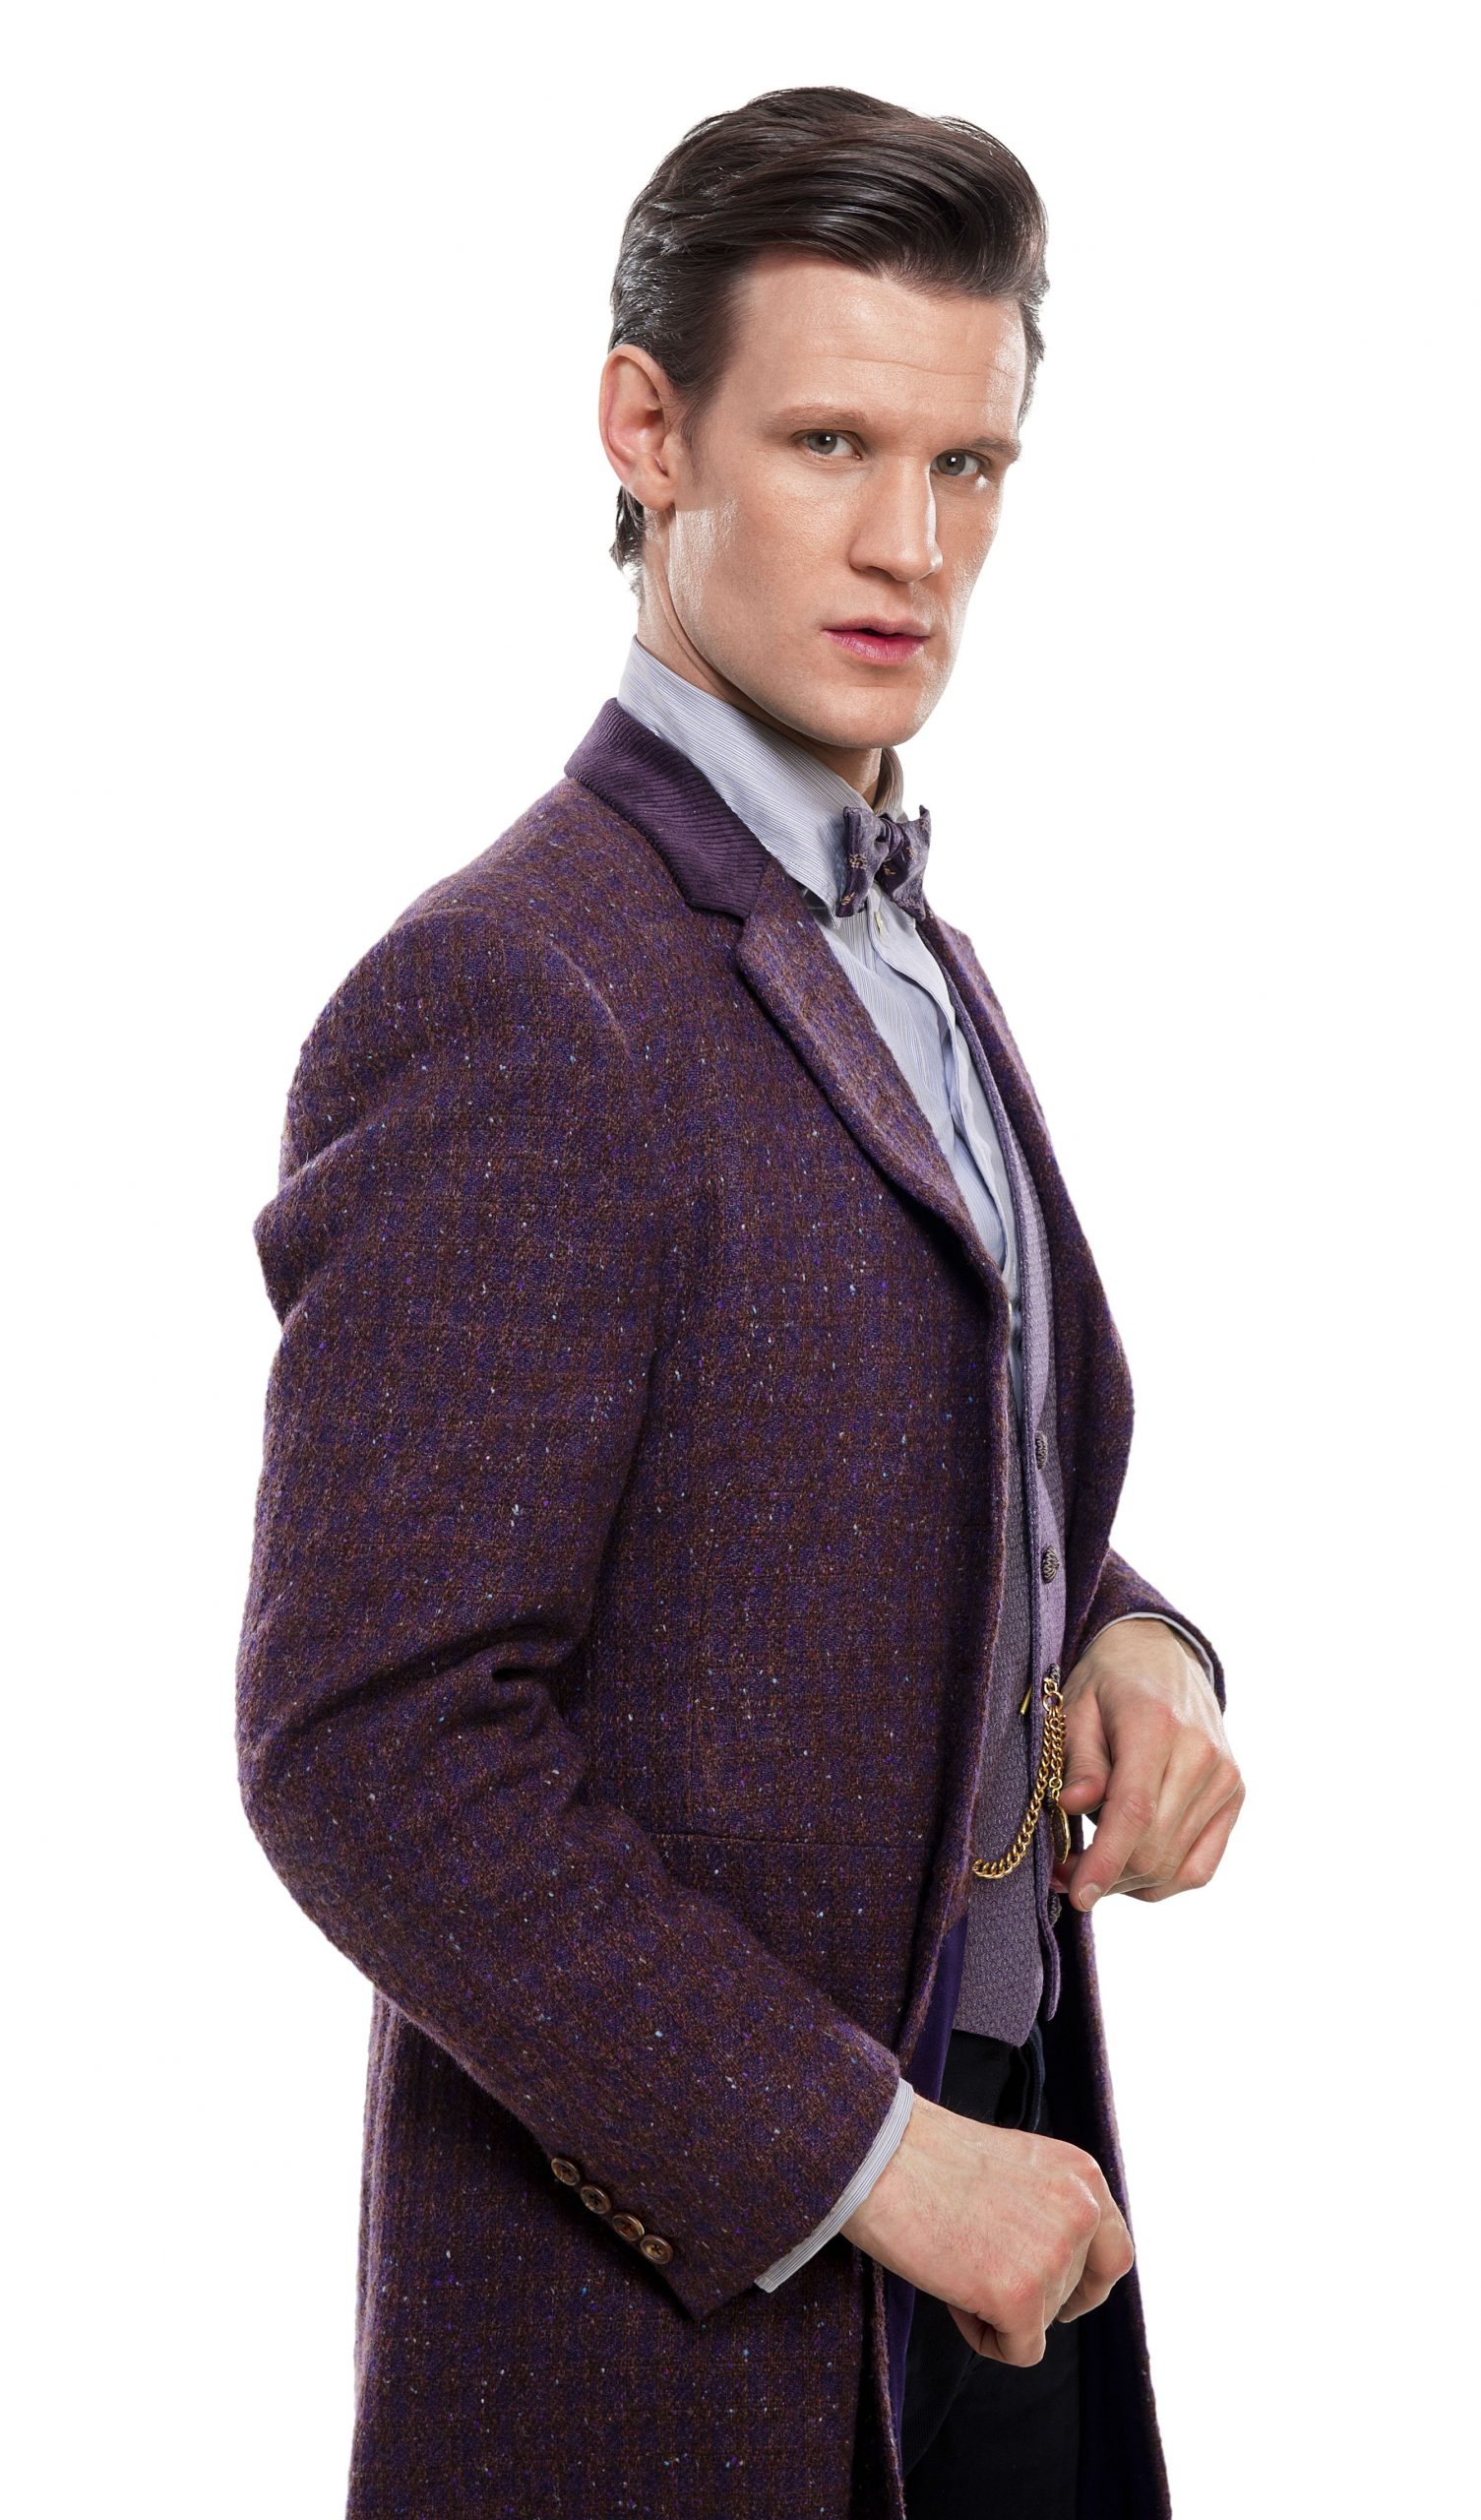 11th Doctor "scales" waistcoat appearances